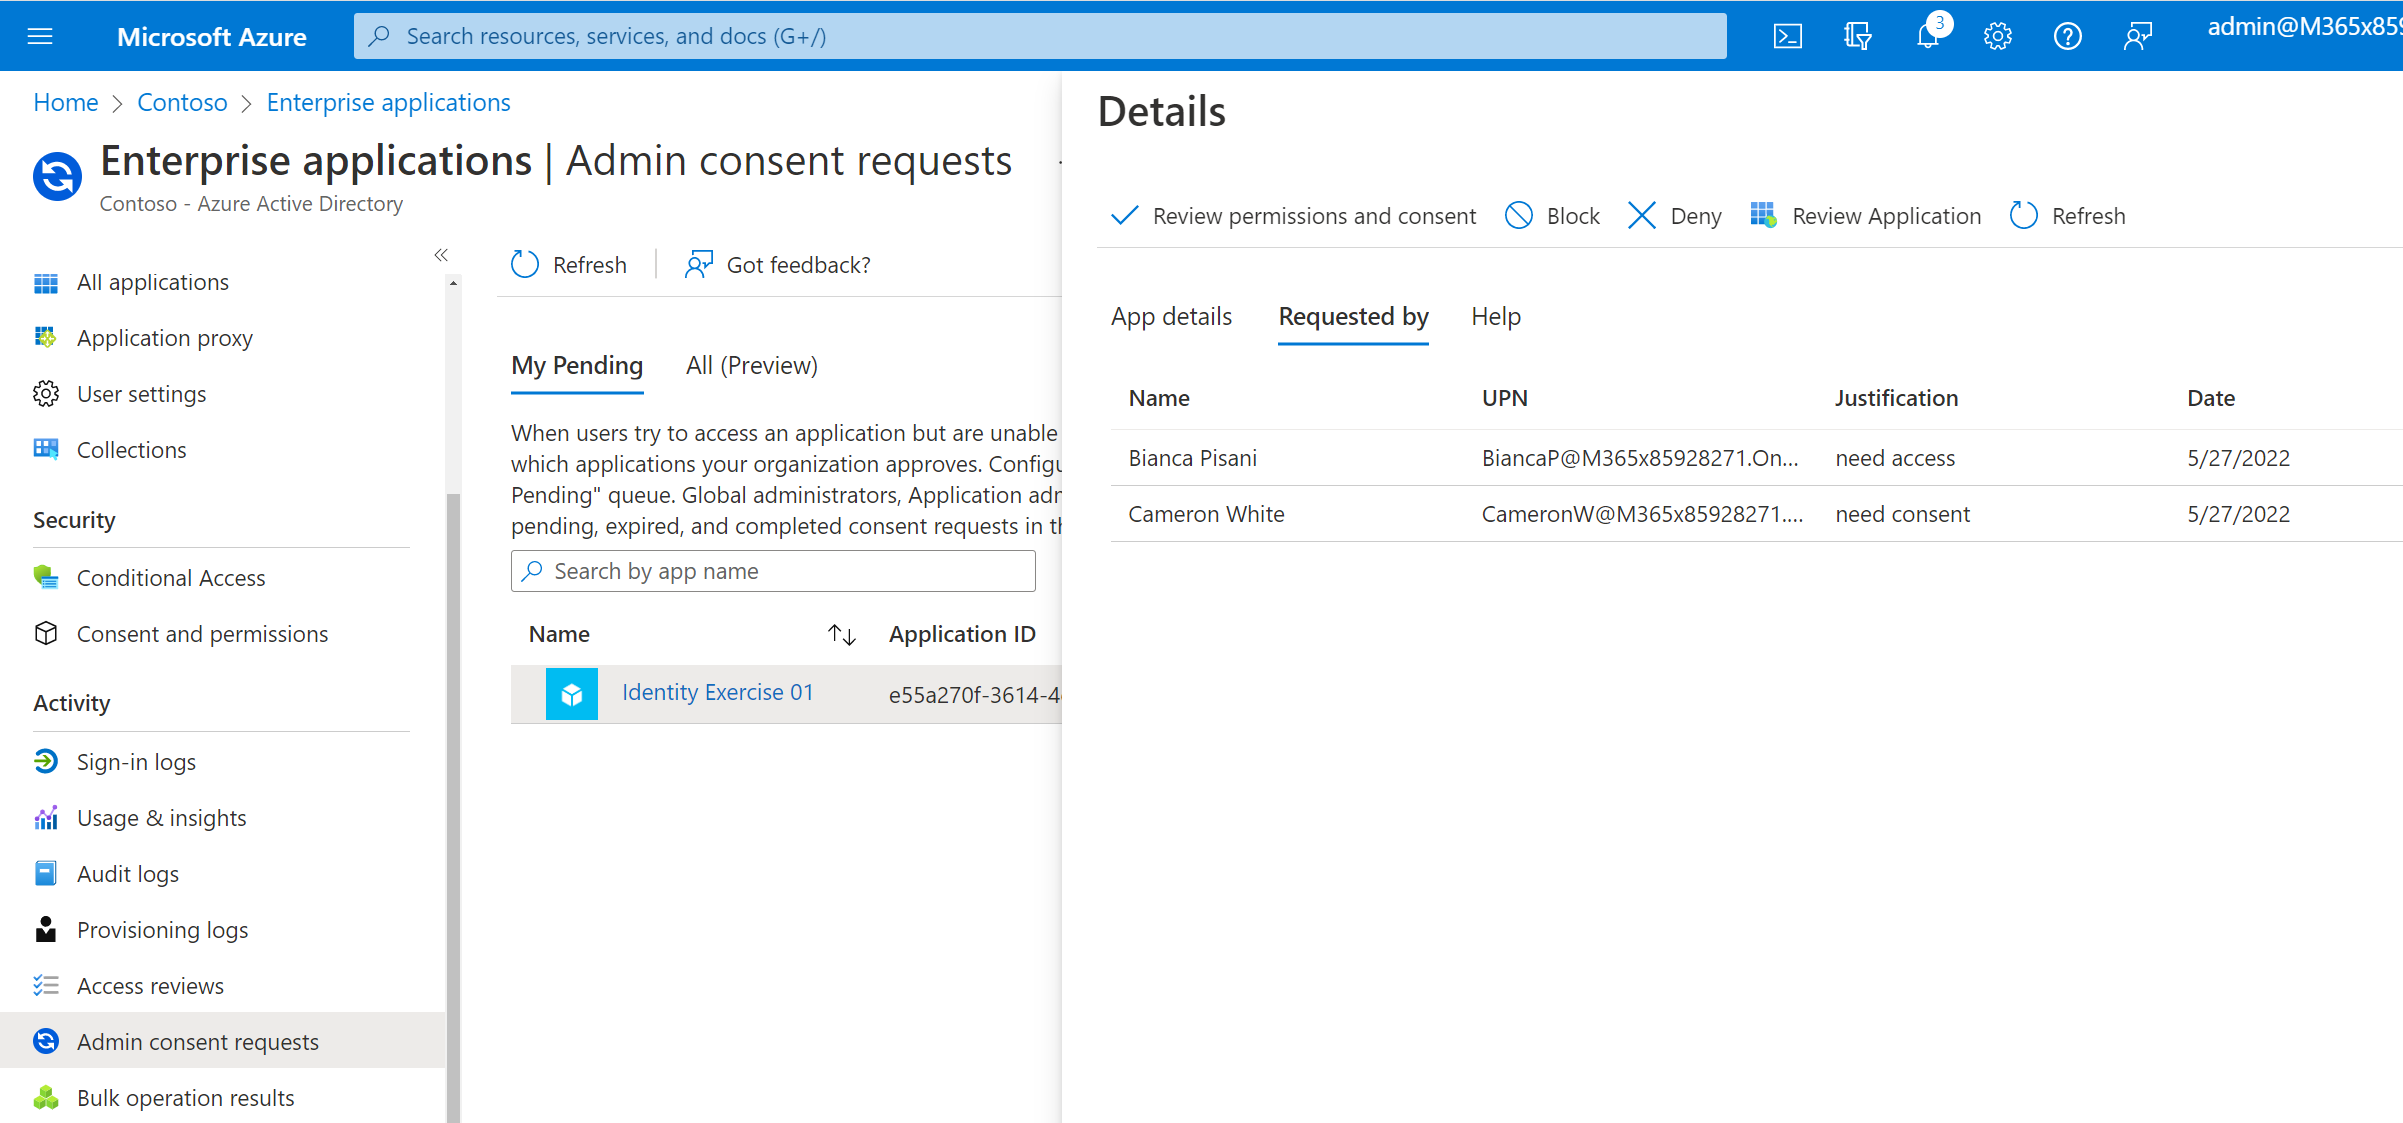 Screenshot of the admin consent requests in the portal.